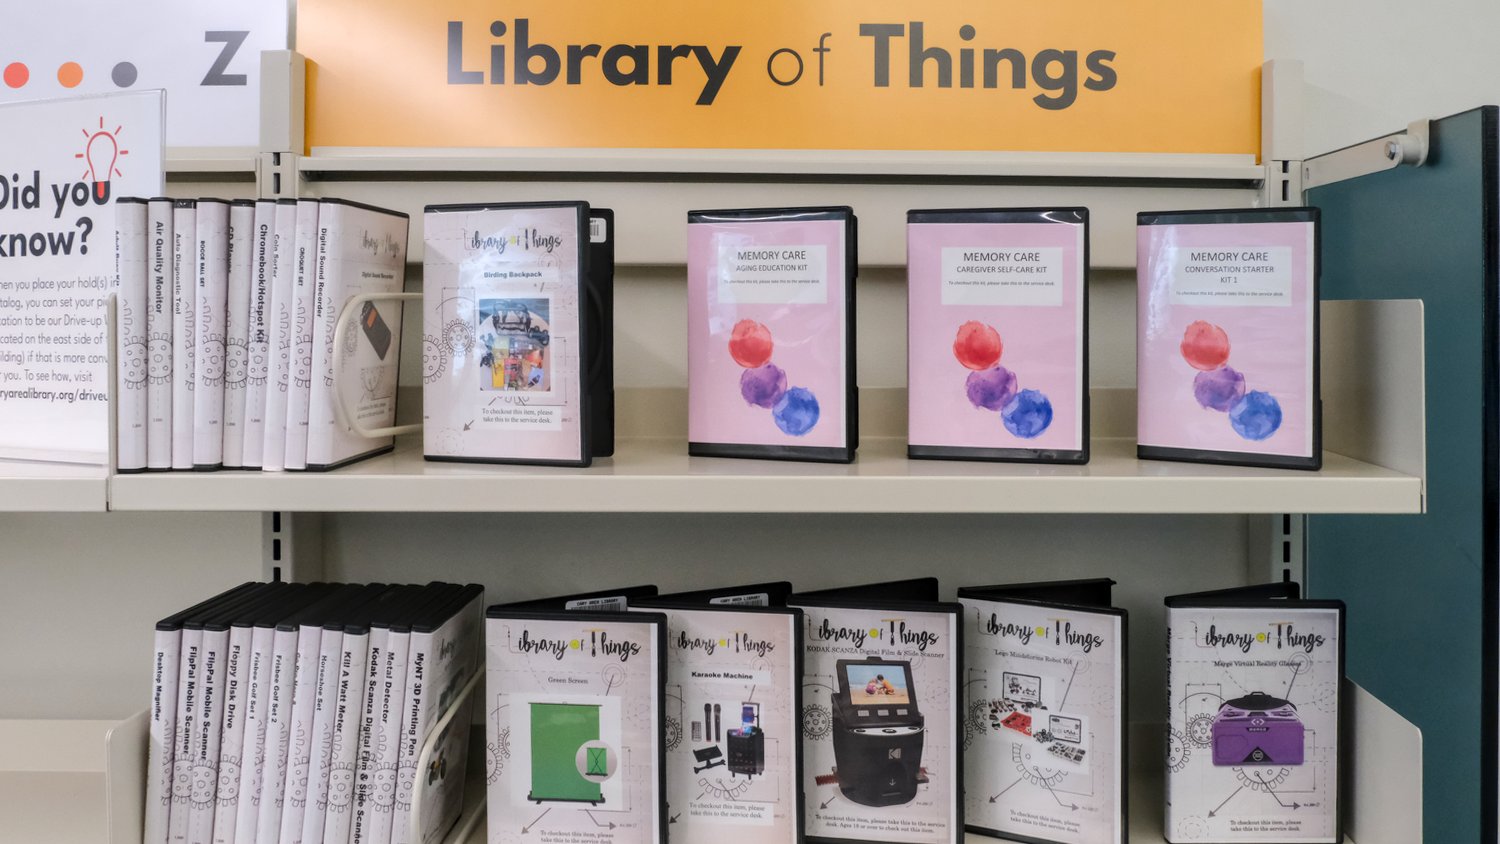 Memory Care kits and Library of Things items.